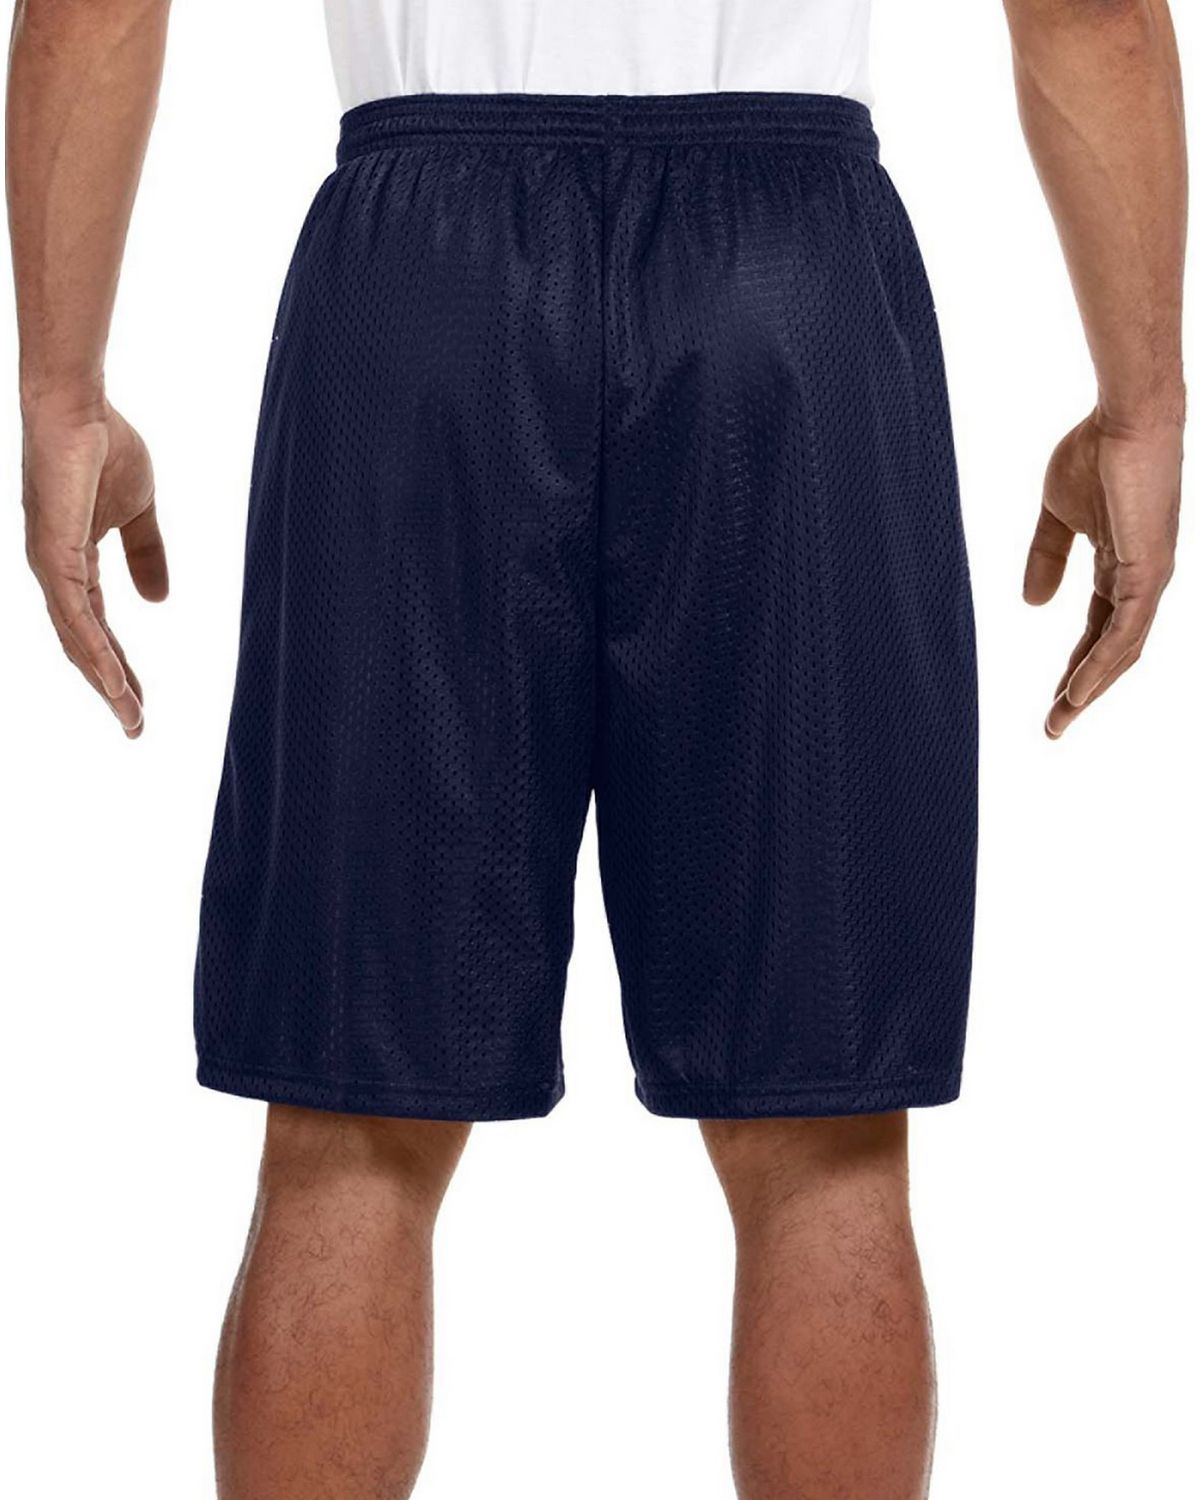 Shop A4 N5296 Adult 9-Inch Lined Tricot Mesh Shorts - Apparelnbags.com